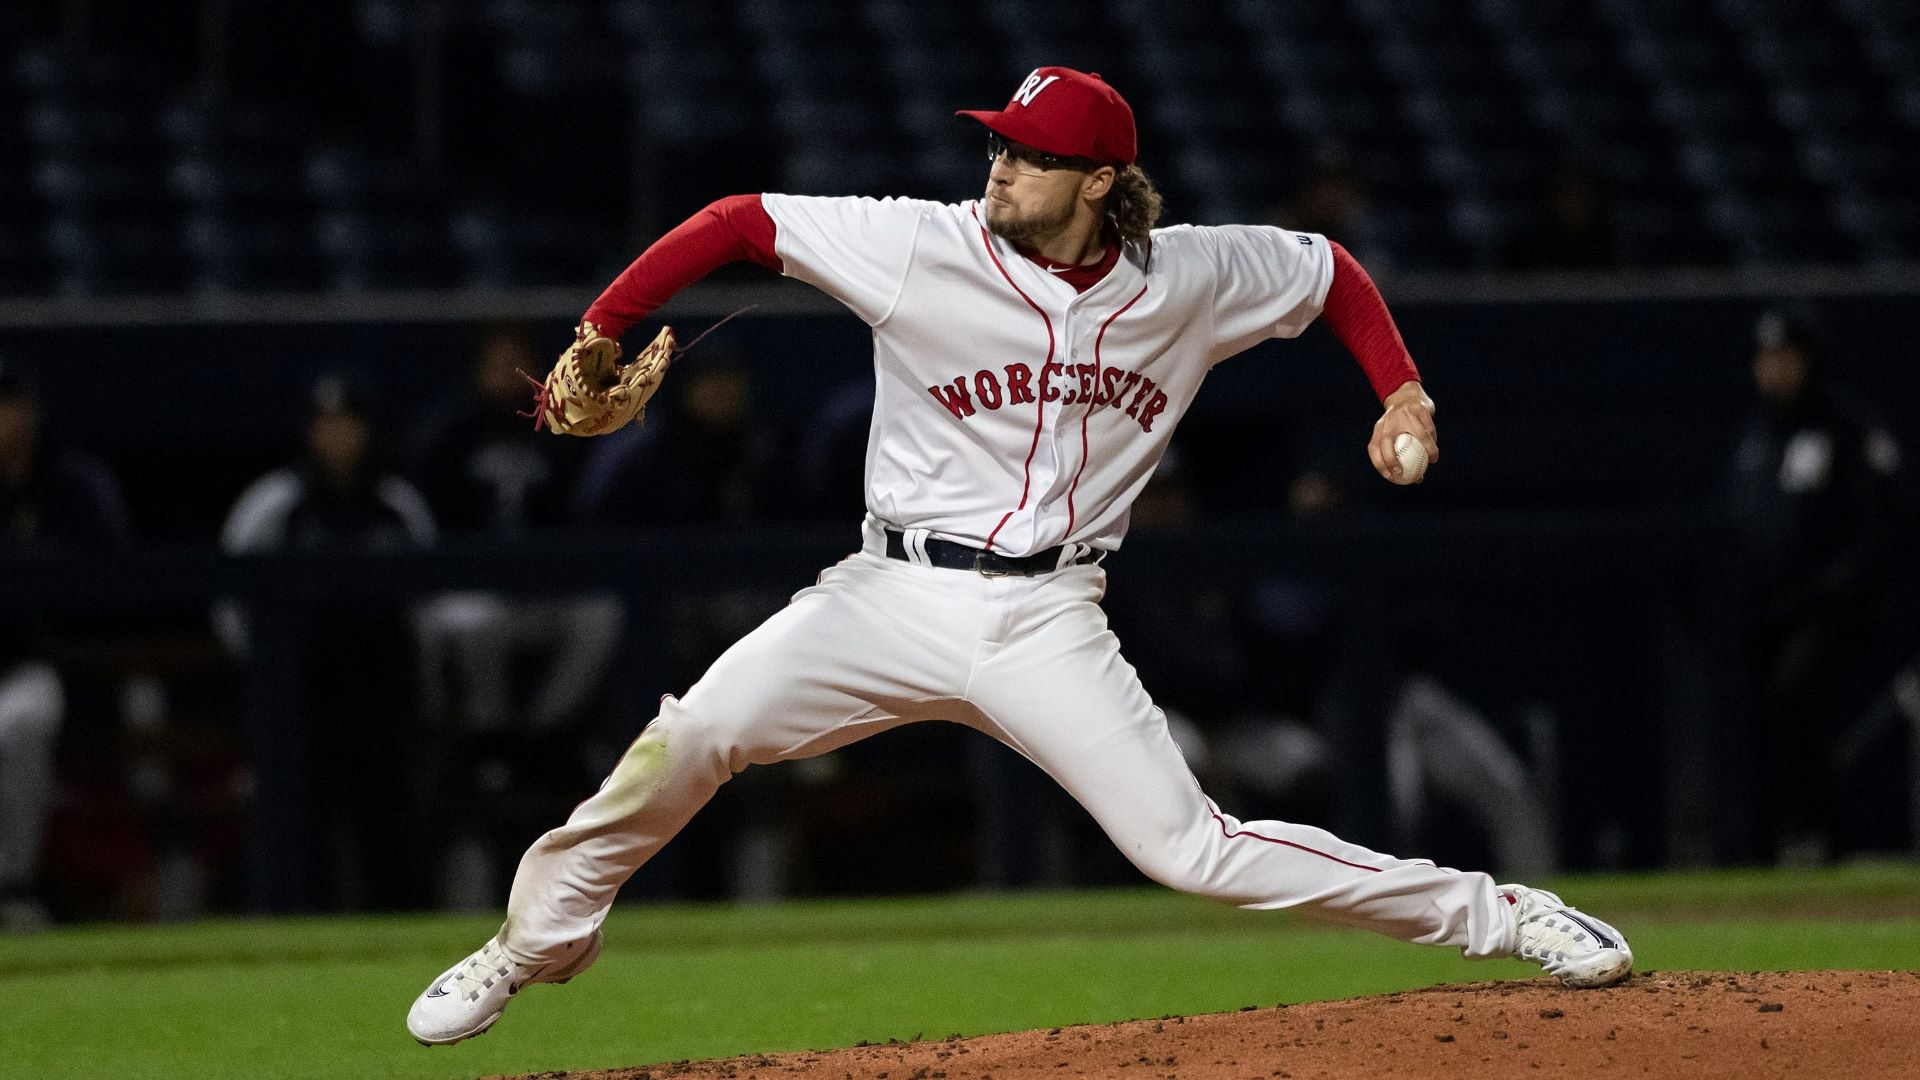 Chris Murphy makes MLB debut with Red Sox, plays for Jessica